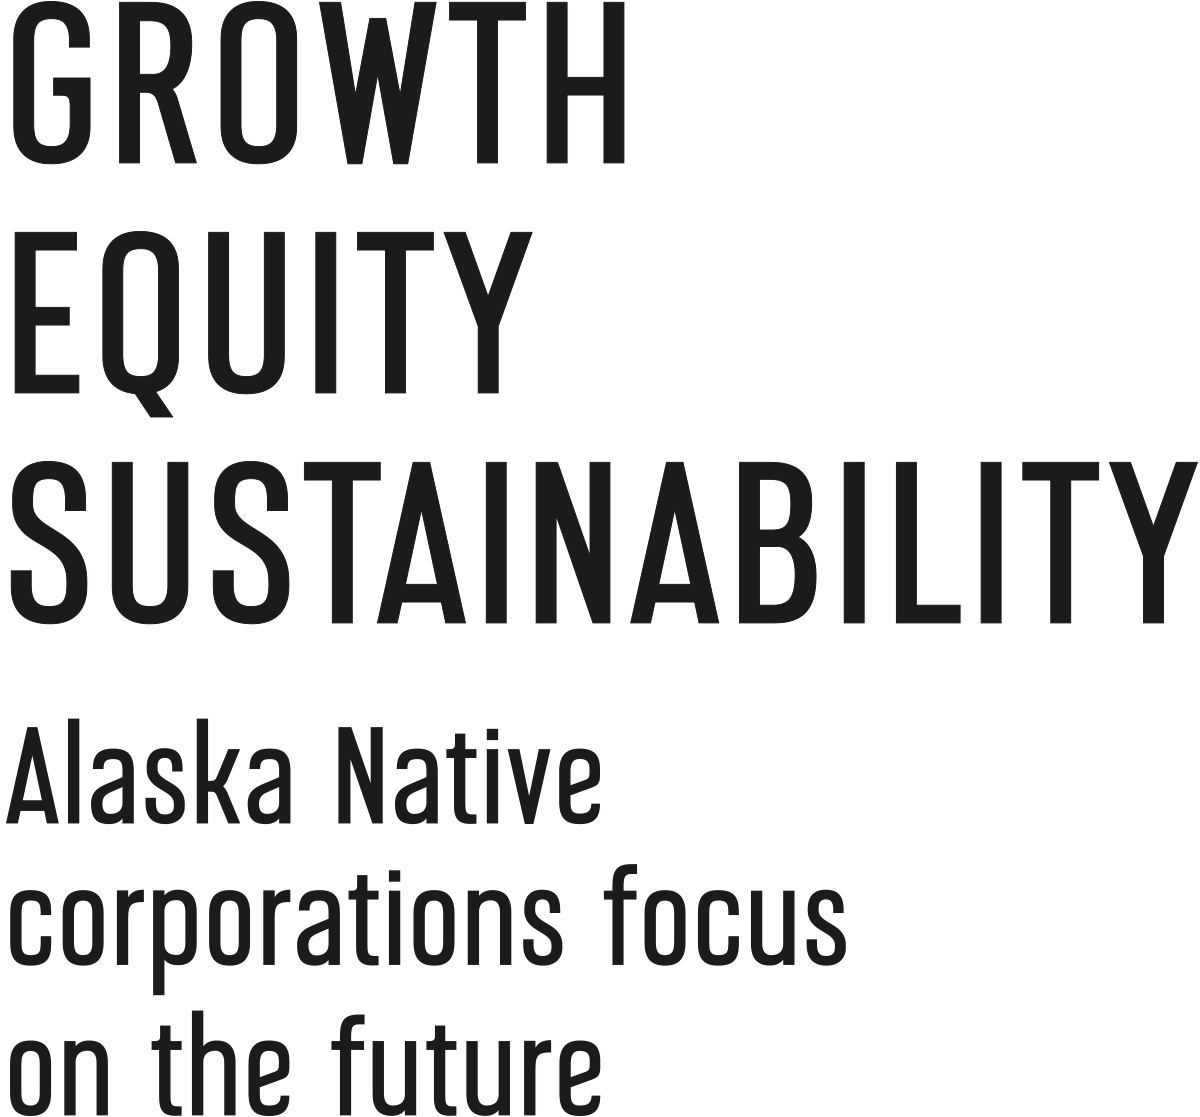 GROWTH EQUITY SUSTAINABILITY